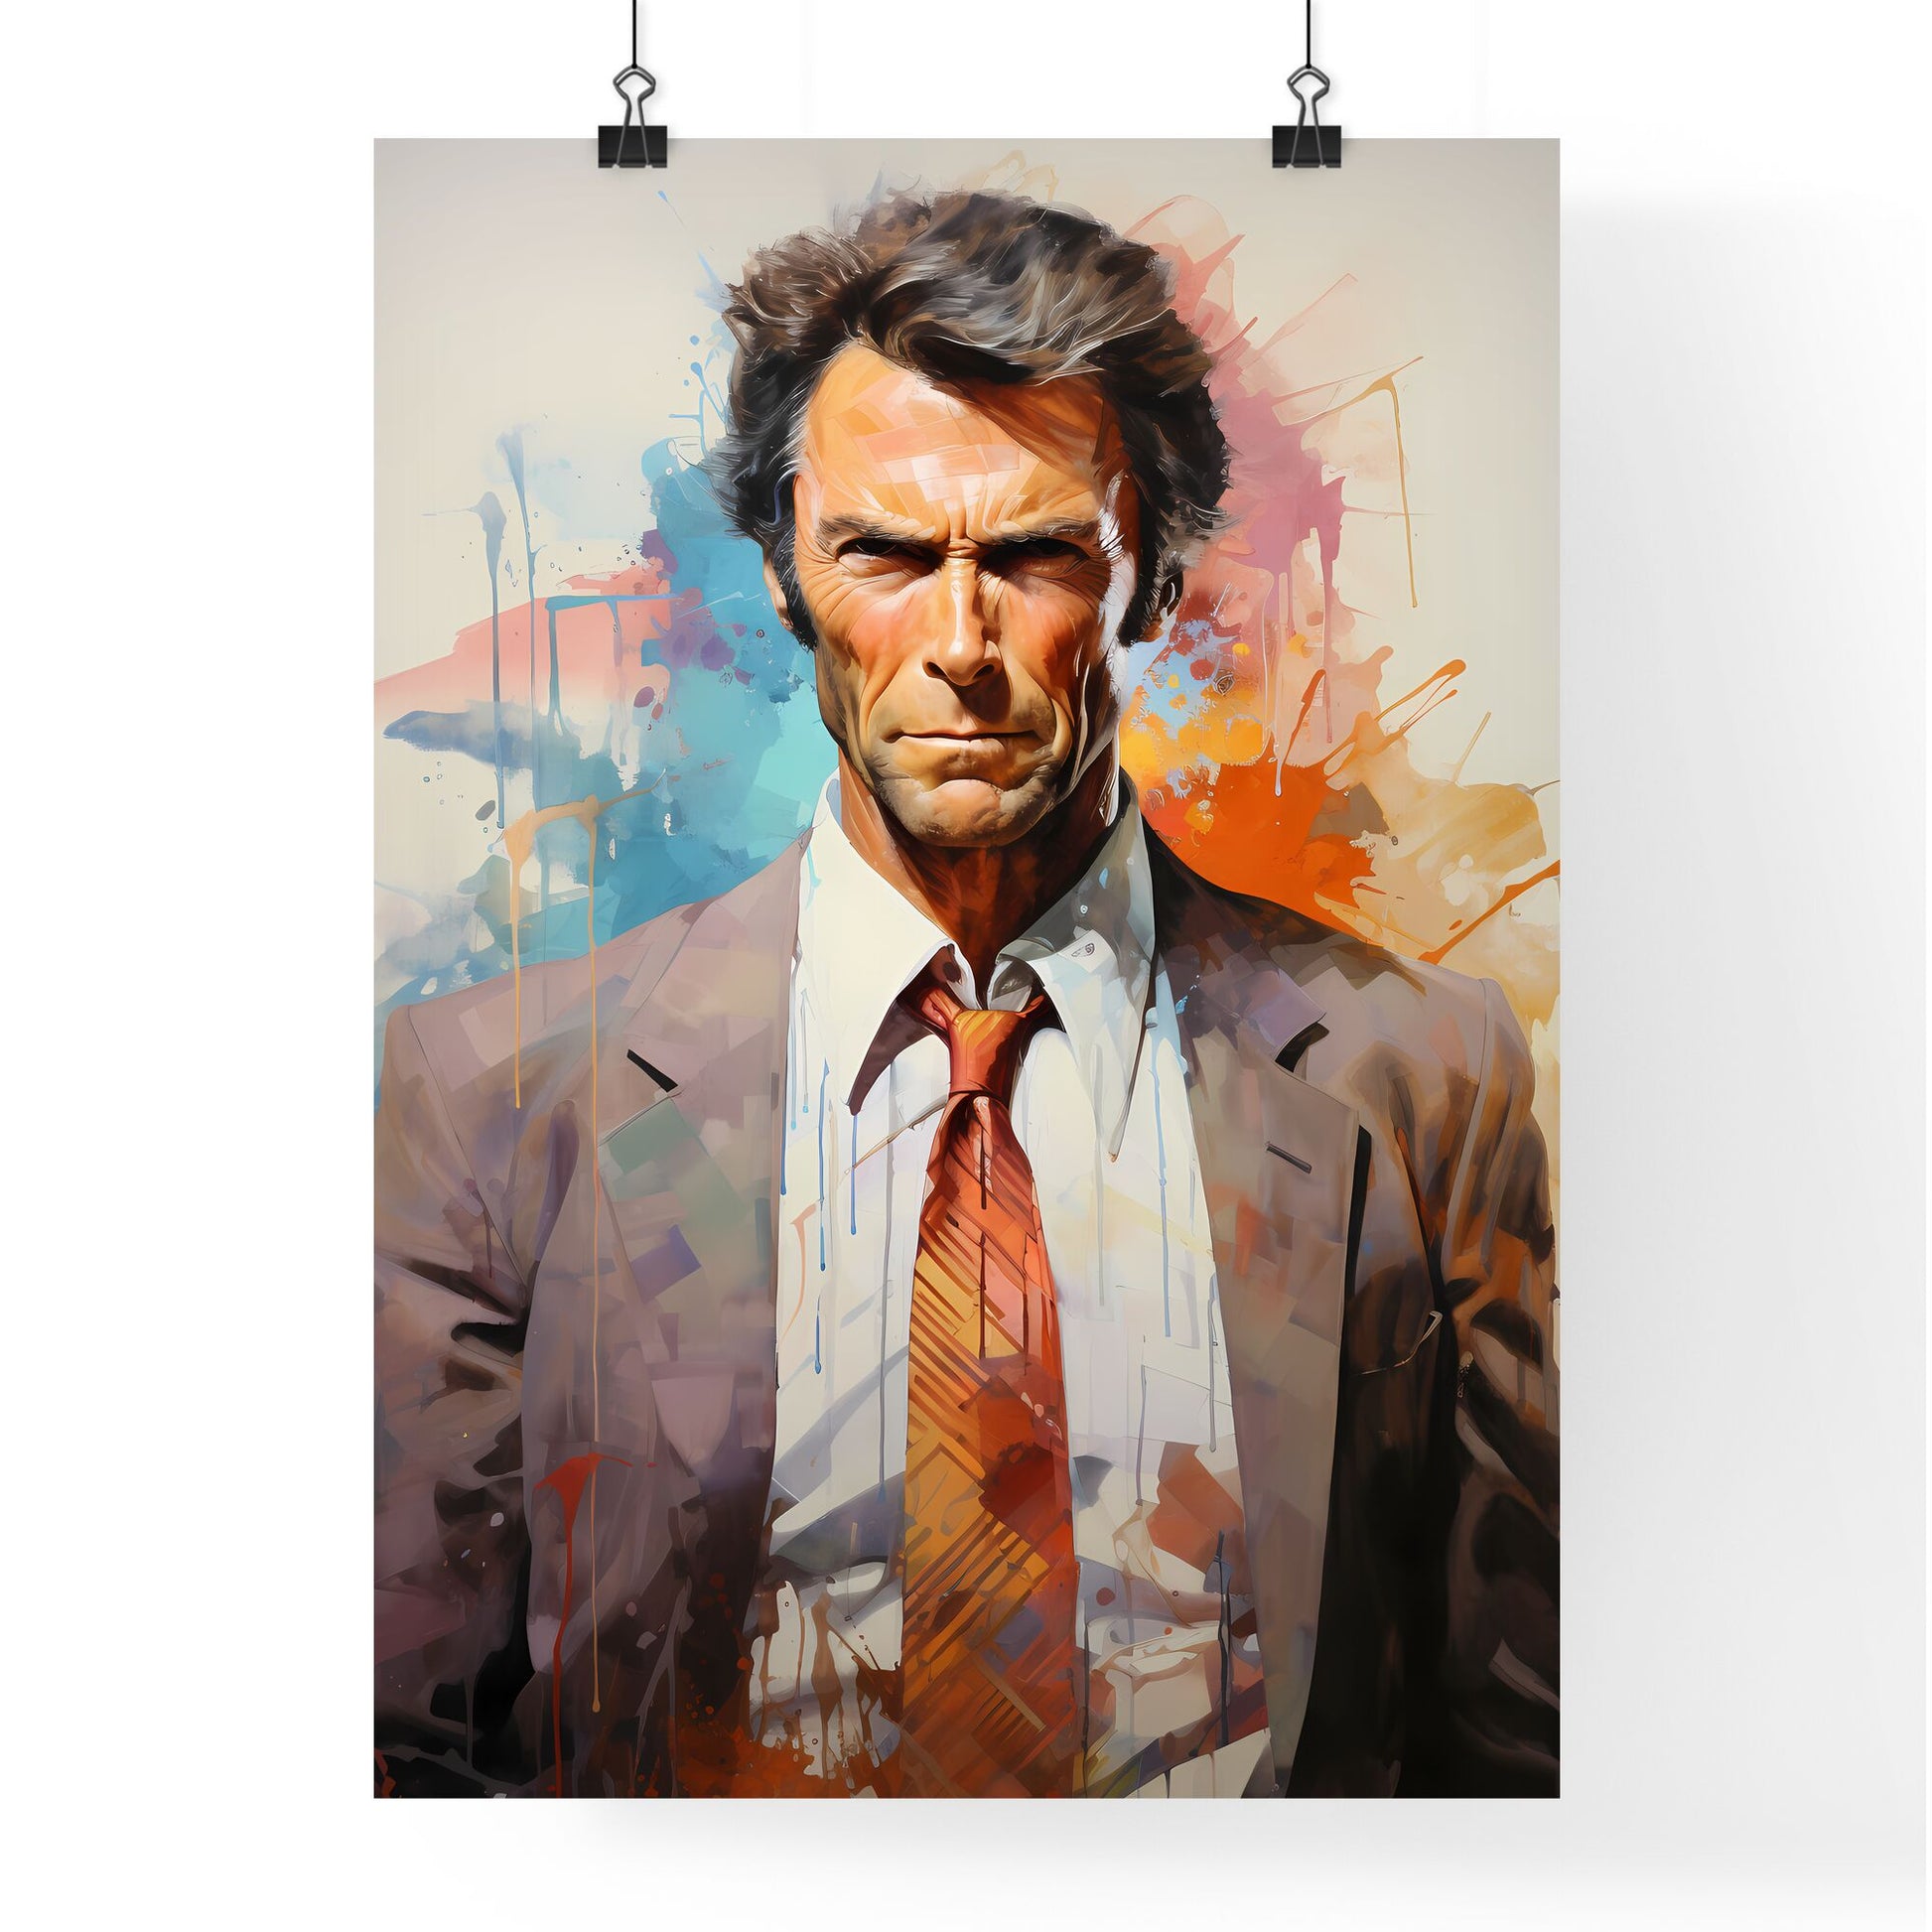 Harry Callahan Clint Eastwood - A Man In A Suit And Tie Default Title